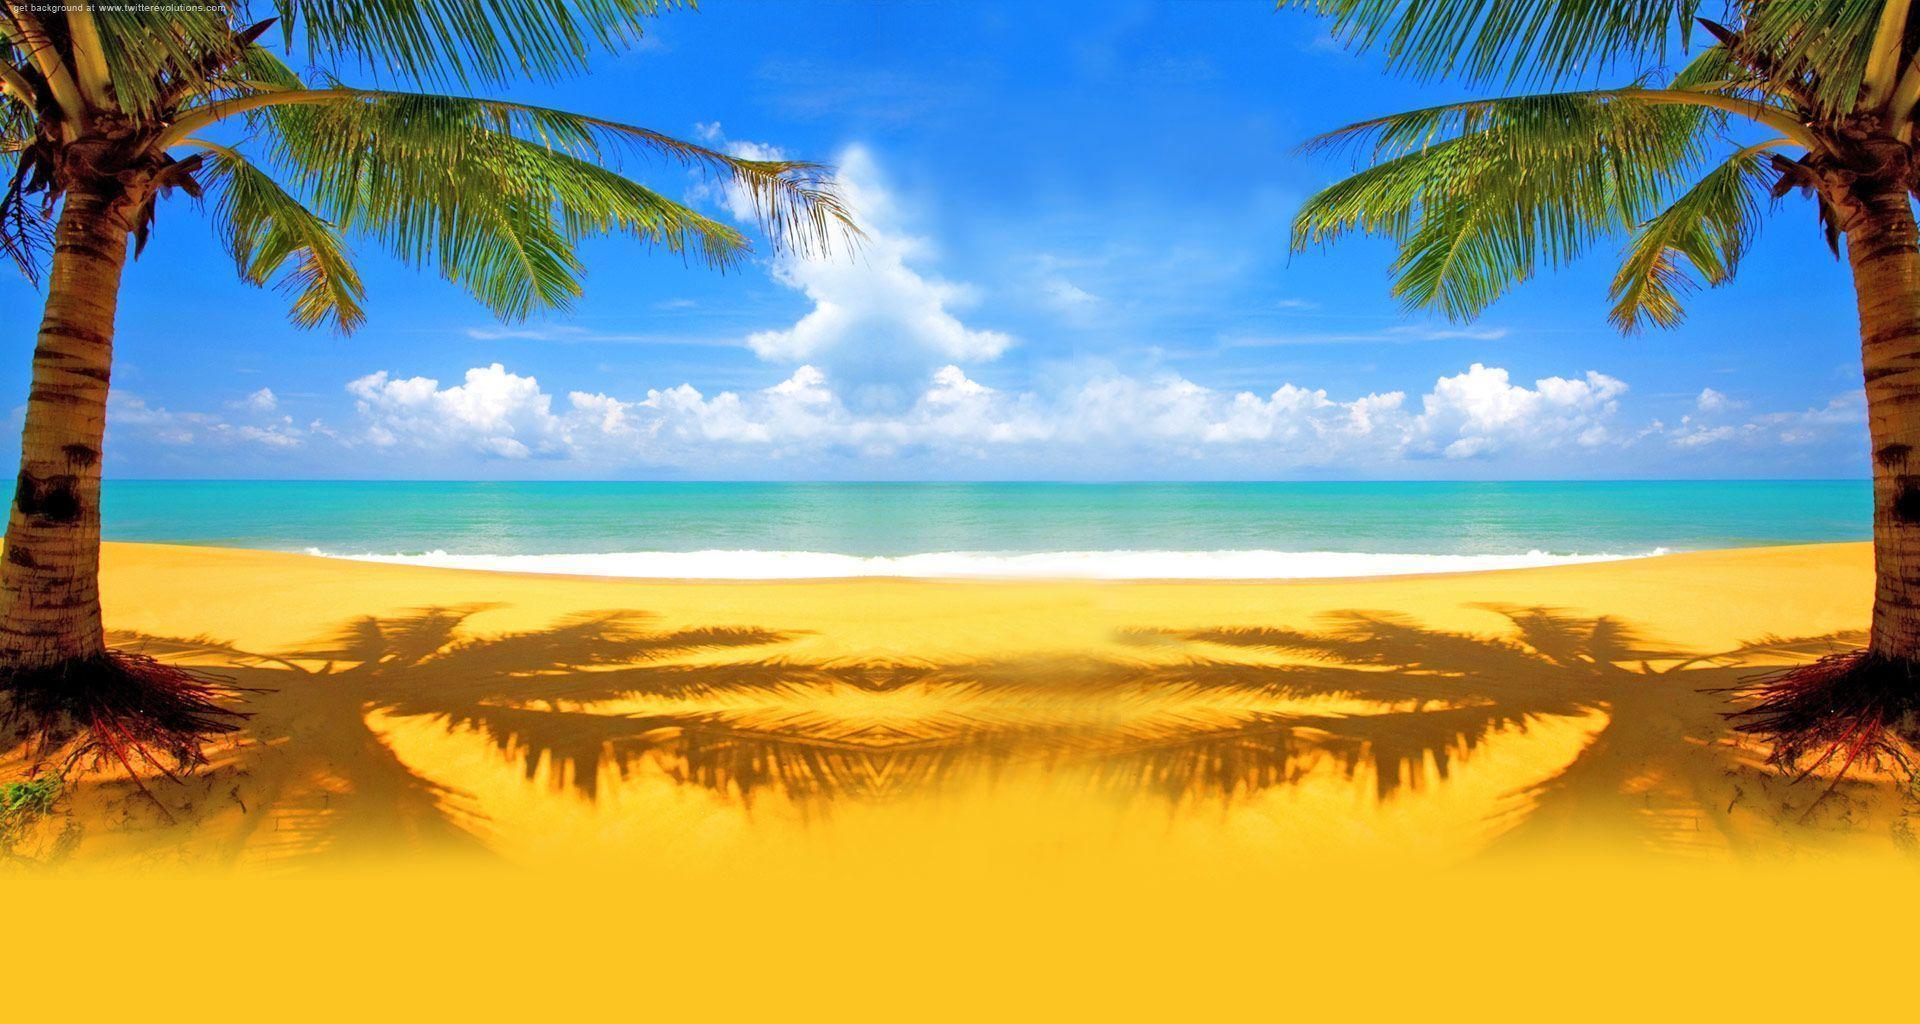 Backgrounds Beach Images - Wallpaper Cave